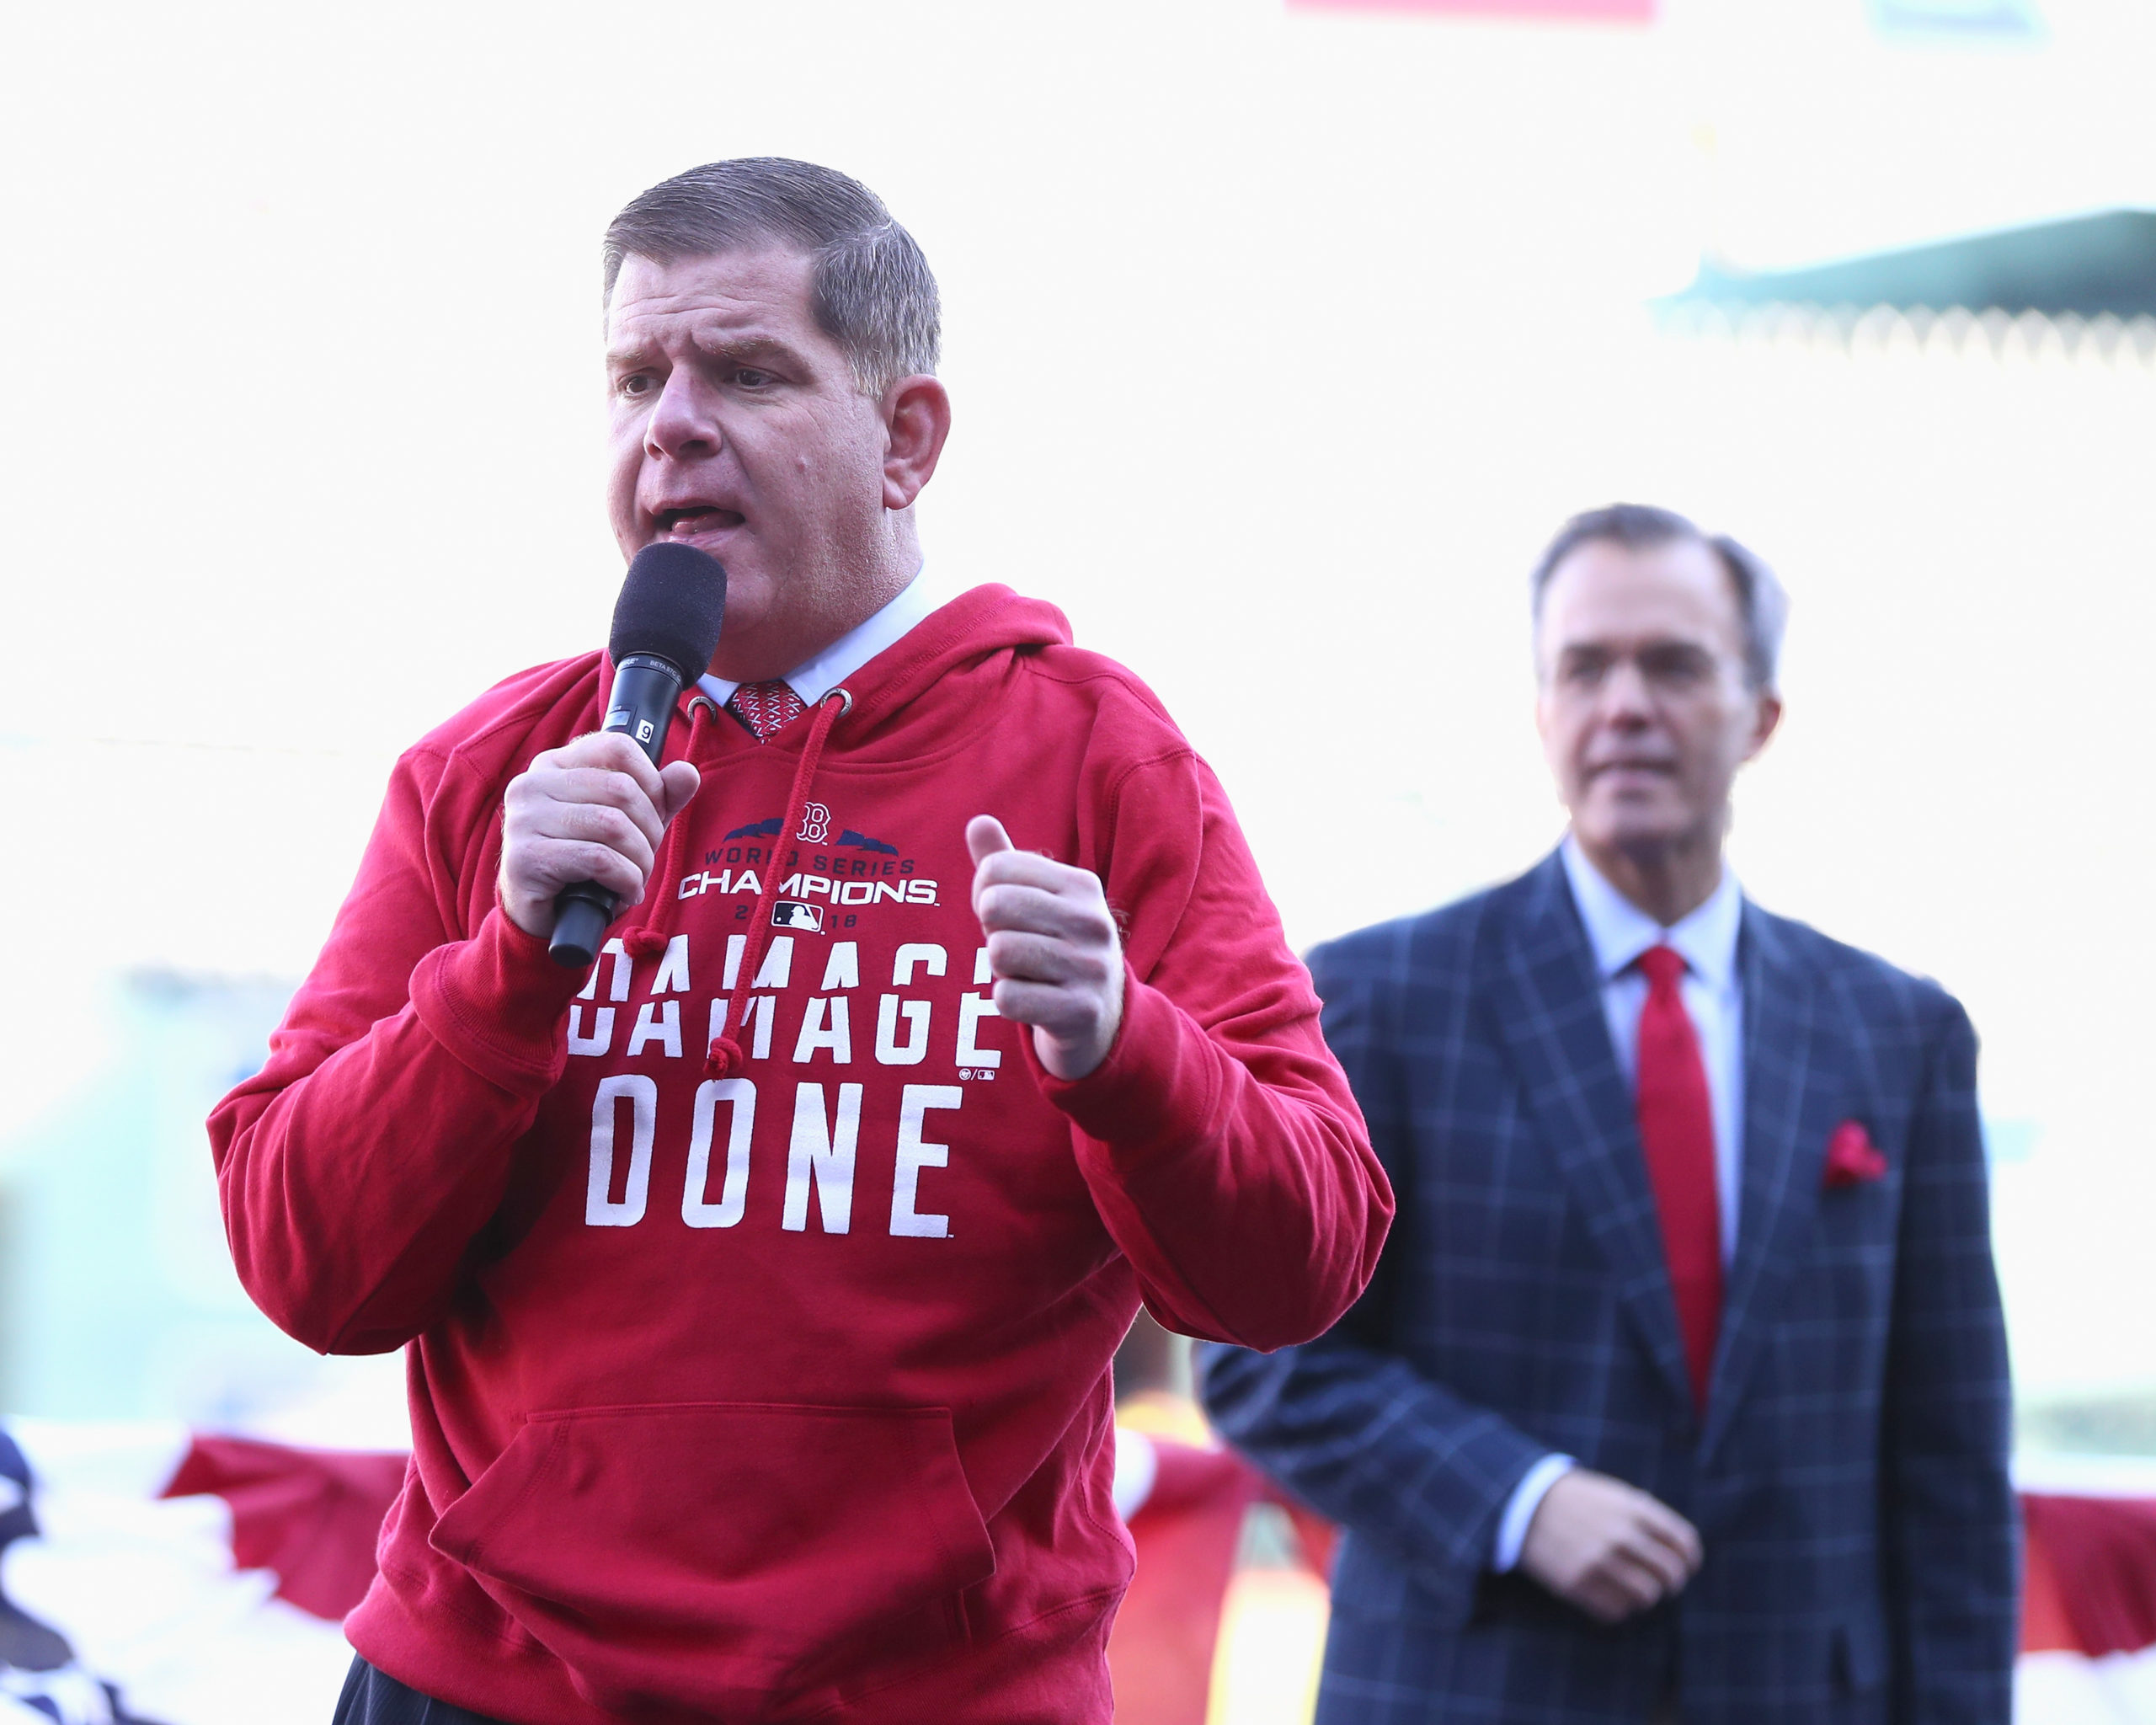 BOSTON, MA - OCTOBER 31: Boston Mayor Marty Walsh address fans at Fenway Park before the Boston Red Sox Victory Parade on October 31, 2018 in Boston, Massachusetts. The Boston Red Sox defeated the Los Angeles Dodgers to win the 2018 World Series. (Omar Rawlings/Getty Images)